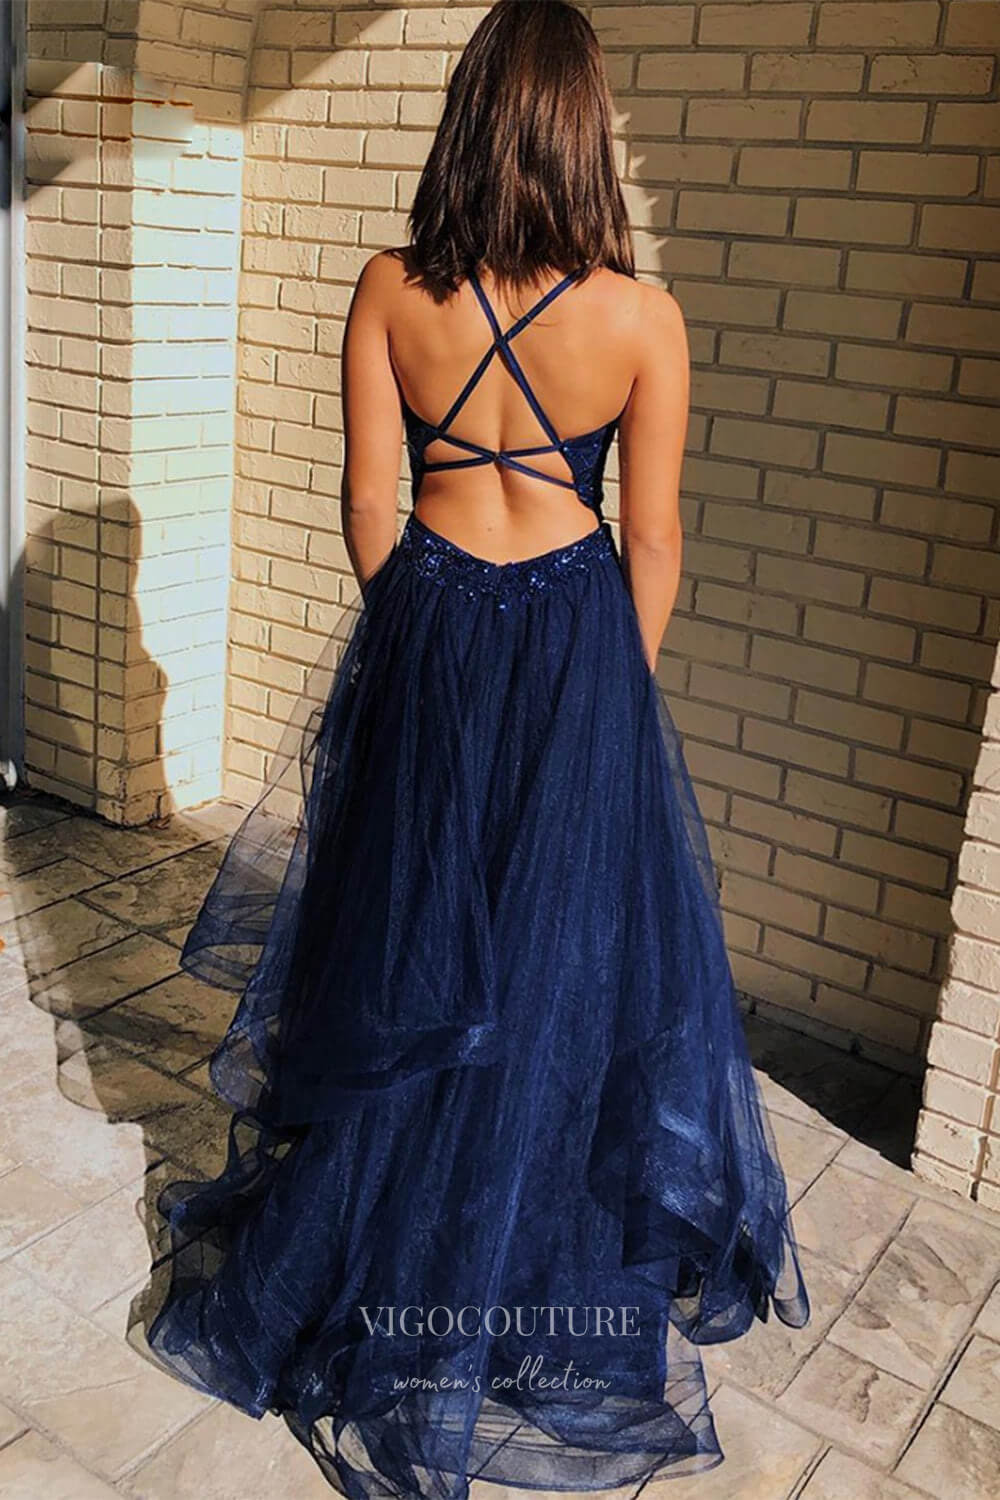 Radiant Navy Blue Sequin Bodice Ruffled Tulle Bottom Prom Dress with Plunging V-Neck and Spaghetti Strap 22216-Prom Dresses-vigocouture-Navy Blue-Custom Size-vigocouture